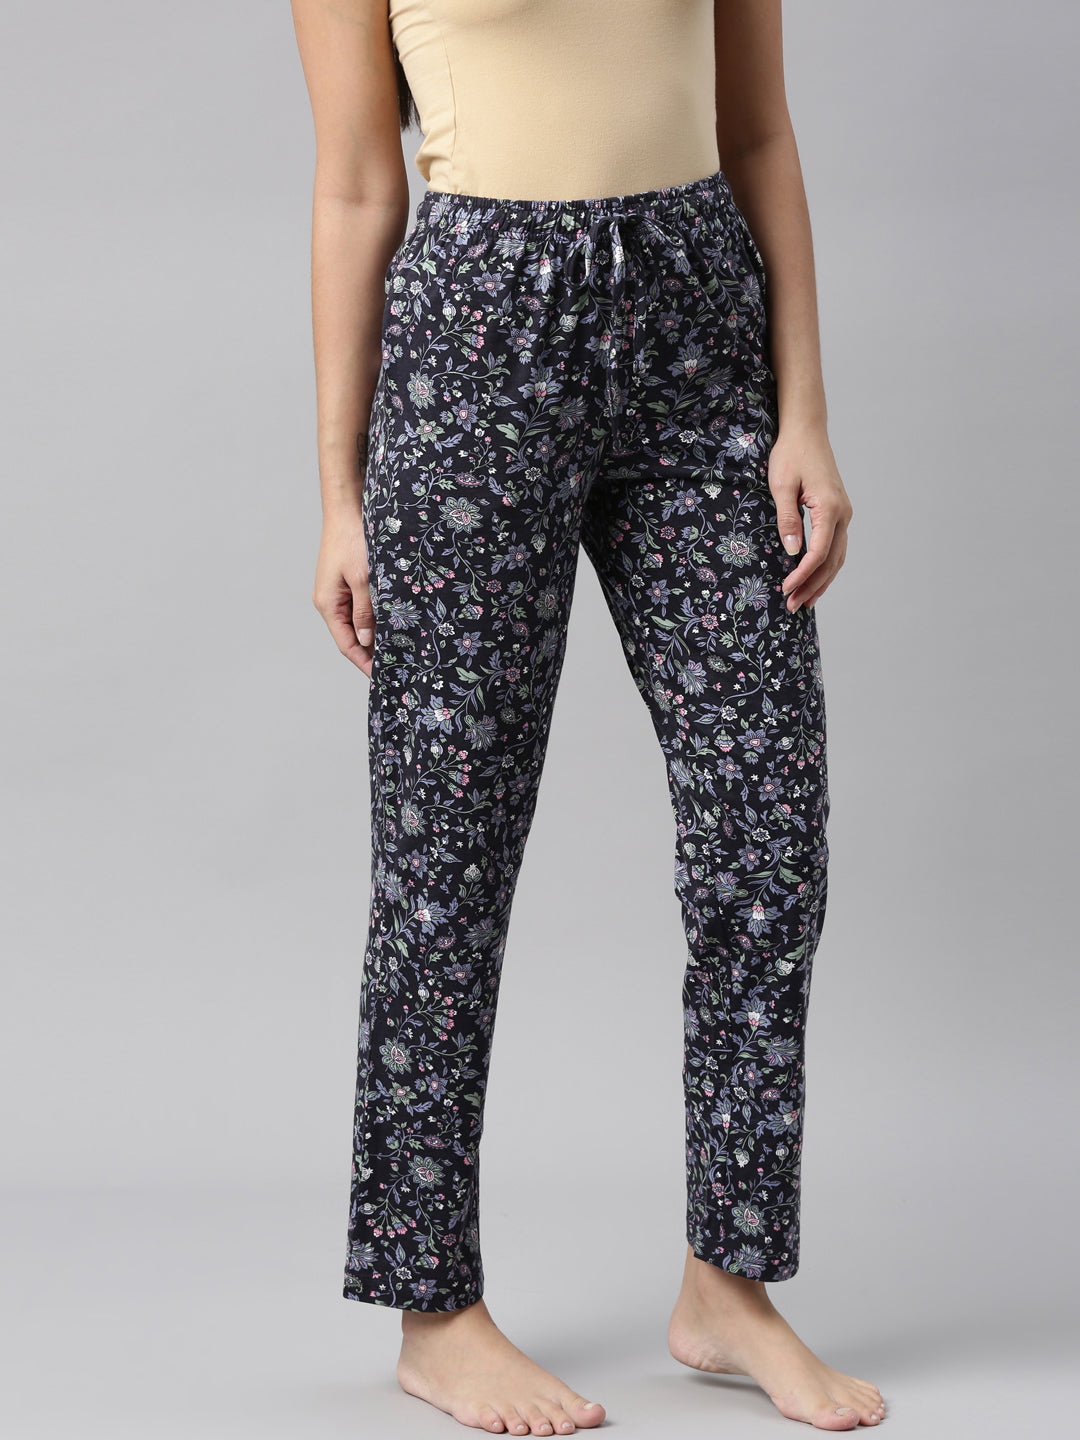 Women Printed Navy Cotton Relaxed Fit Lounge Pants